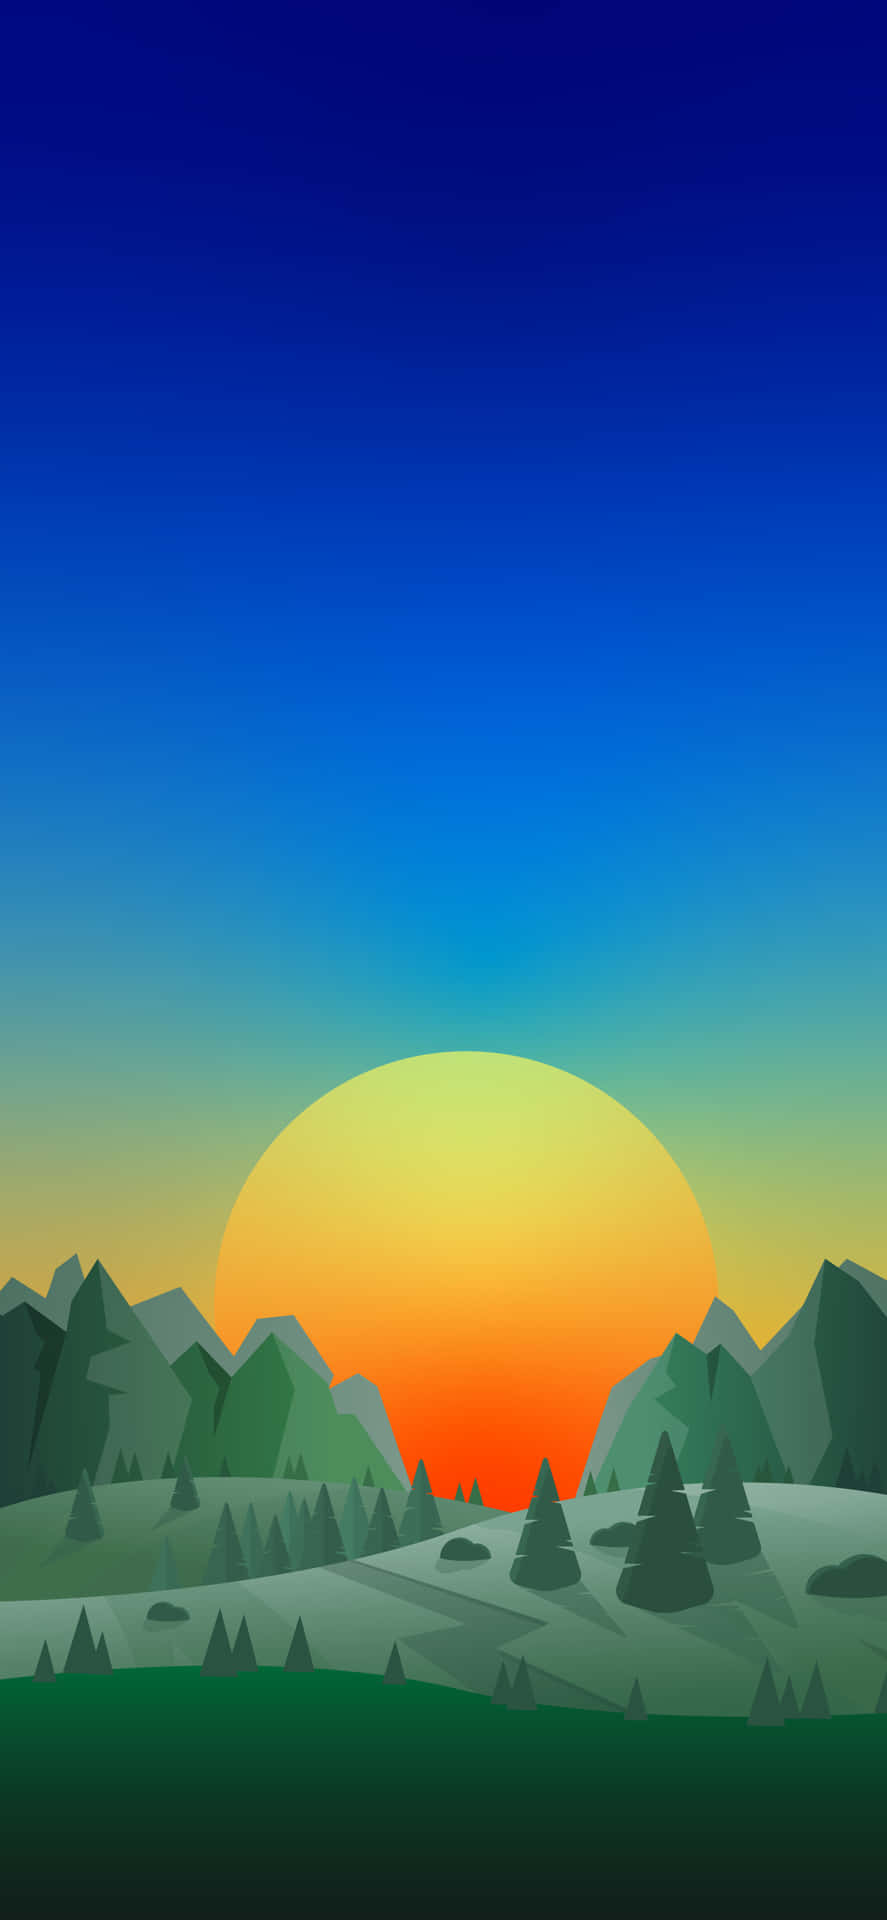 Get excited for the sunrise with the Iphone Wallpaper